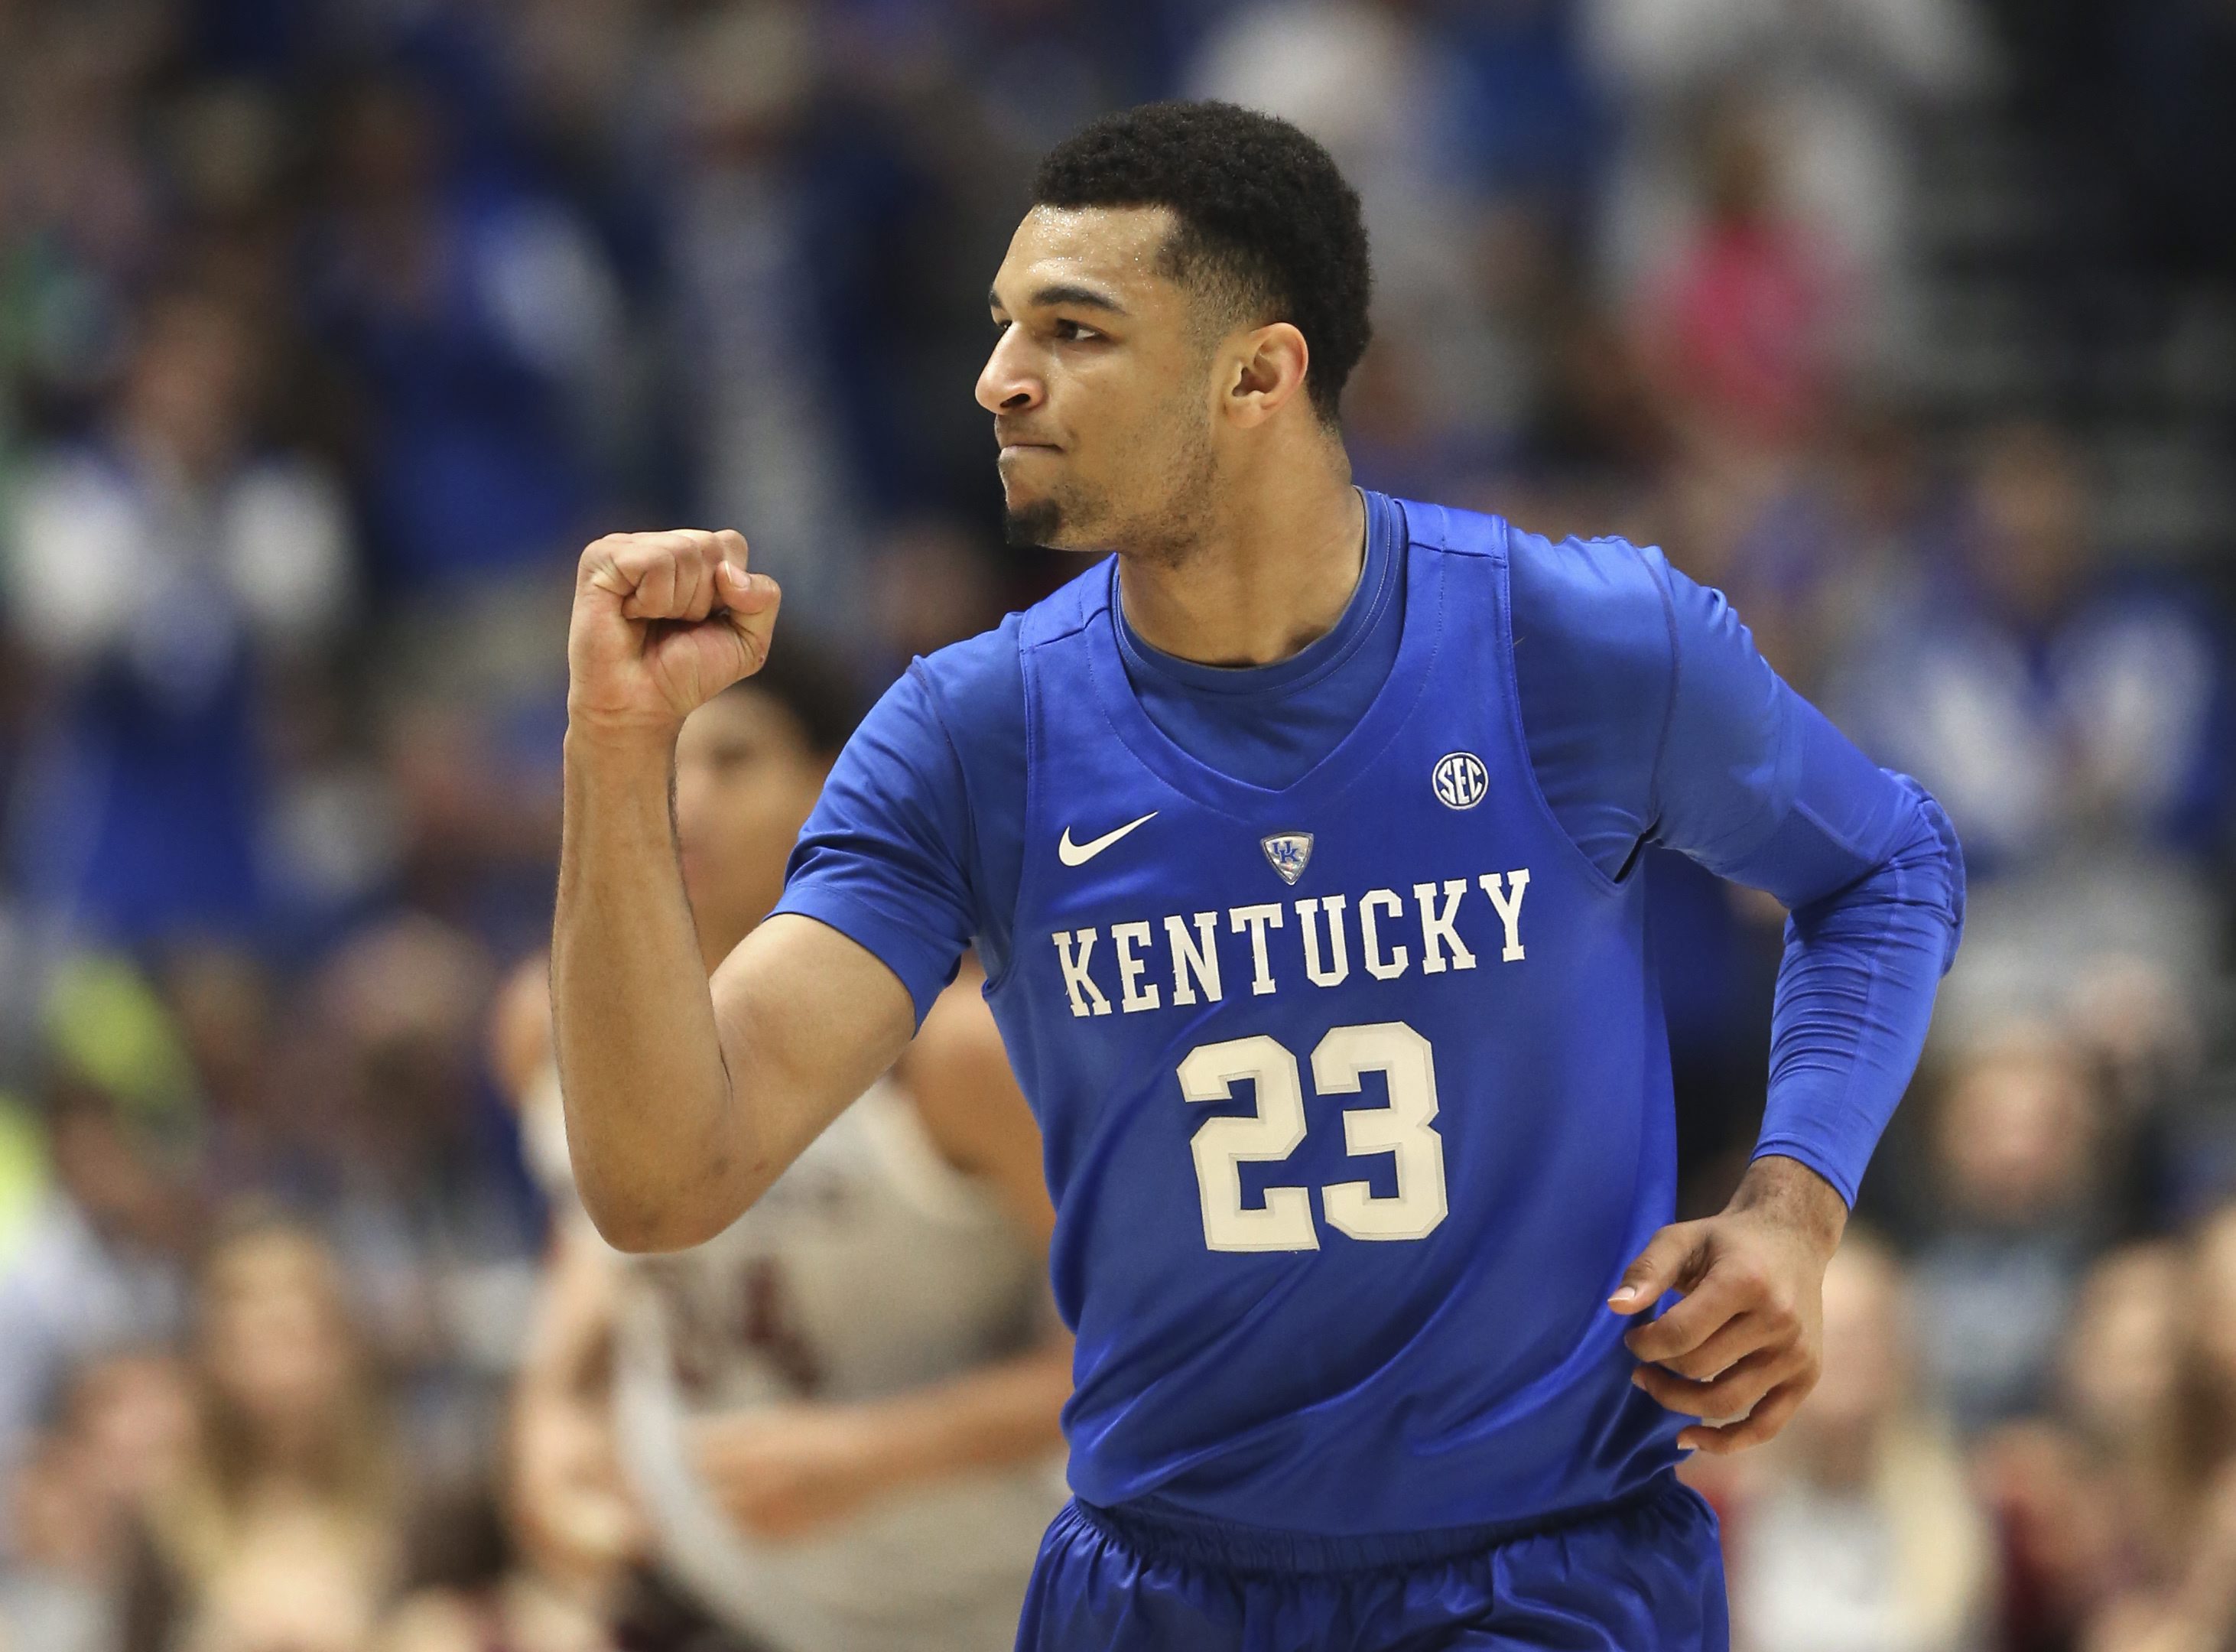 Kentucky's Jamal Murray (23) celebrates after a basket against Texas A&M during the first half of an NCAA college basketball game in the championship of the Southeastern Conference tournament in Nashville, Tenn., Sunday, March 13, 2016. (AP Photo/John Bazemore)